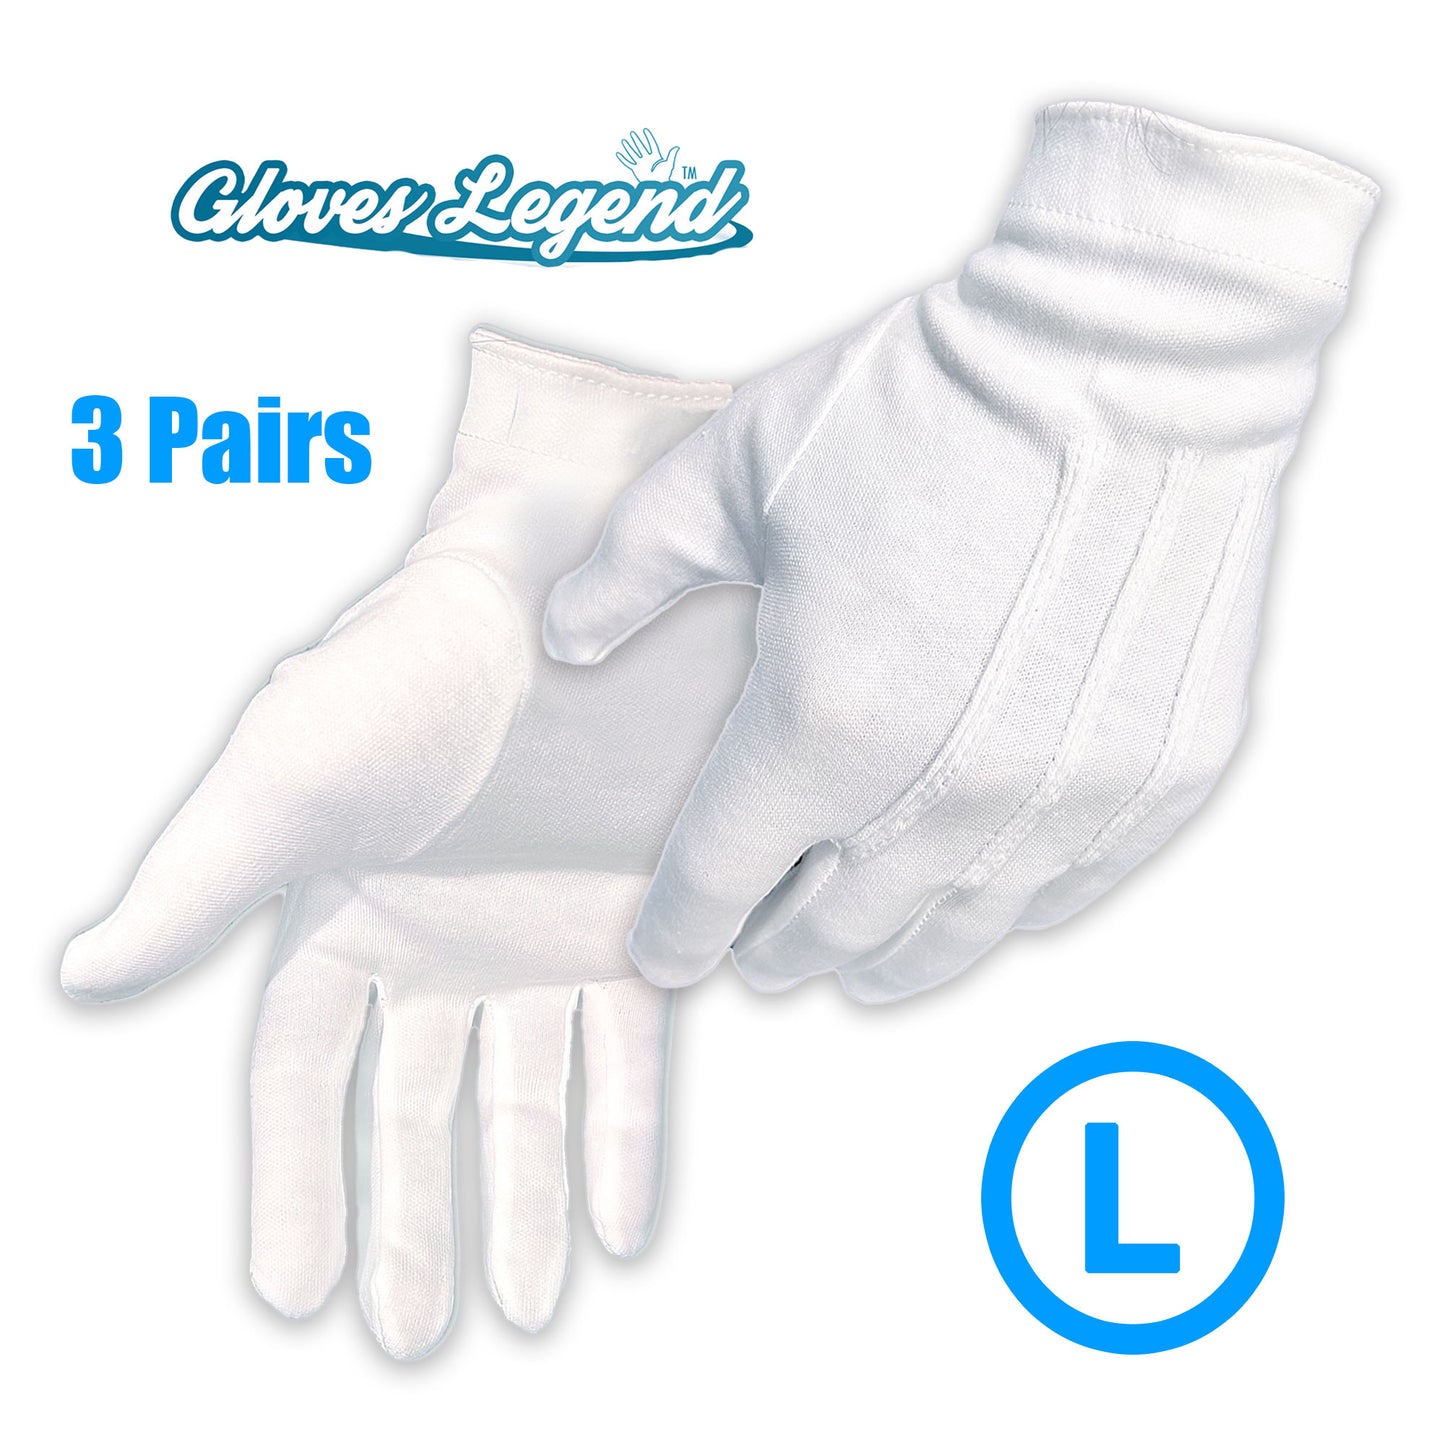 3 Pairs (6 Gloves) Size Large - Gloves Legend 100% White Cotton Marching Parade Formal Dress Gloves